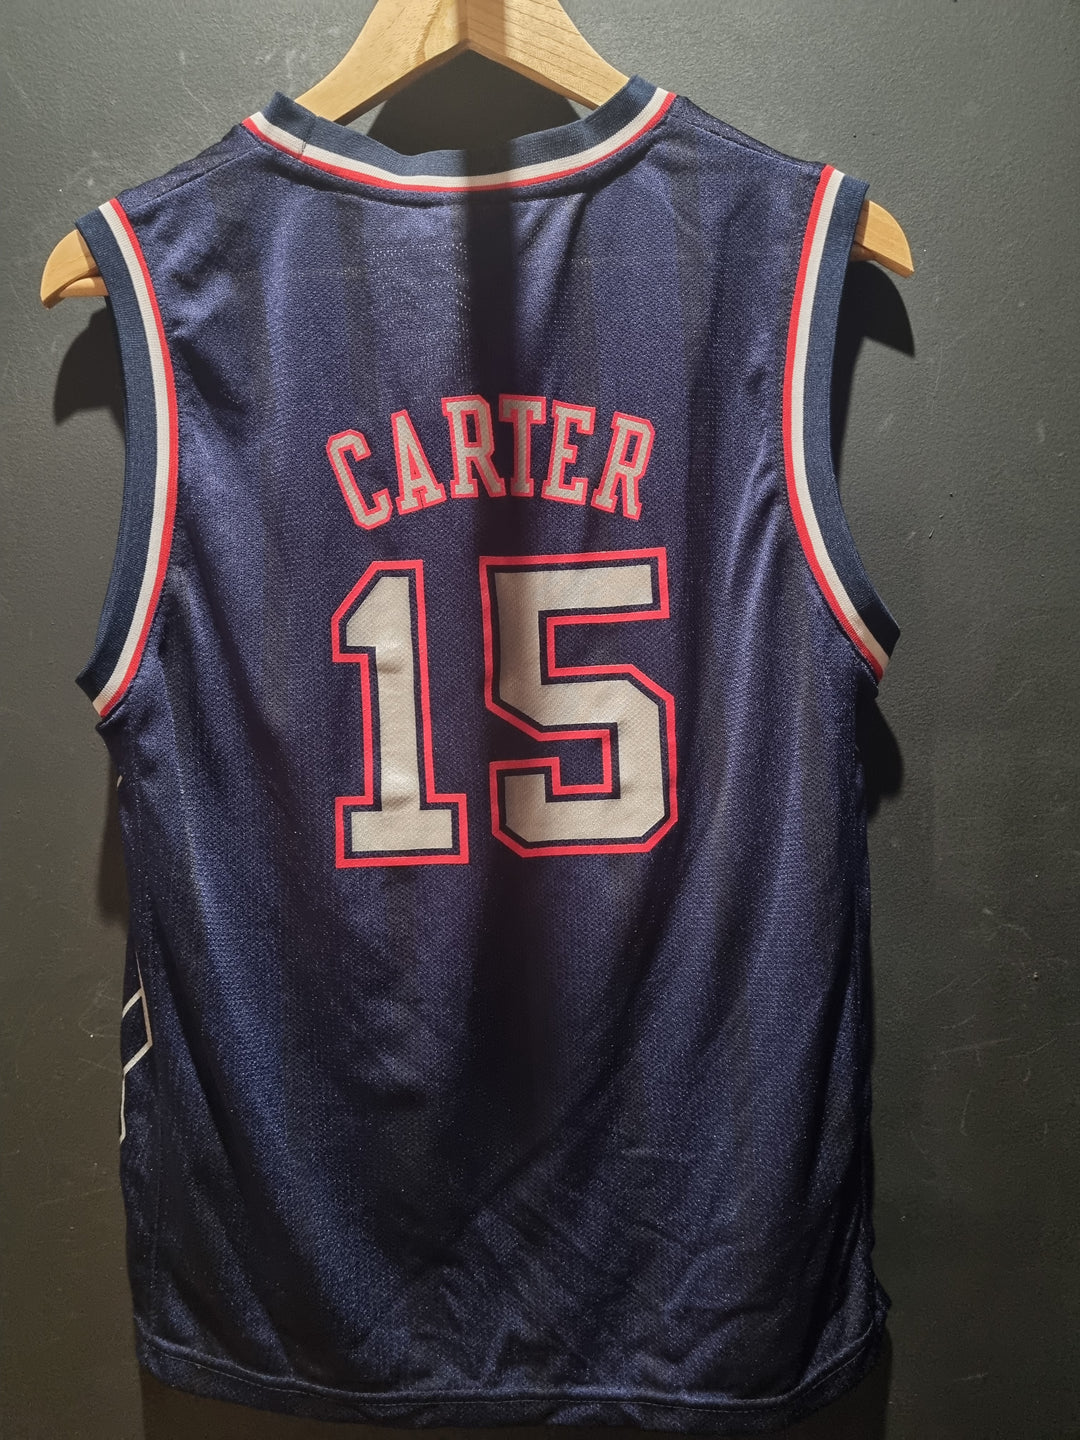 New Jersey Vince Carter Reebok Youth Large